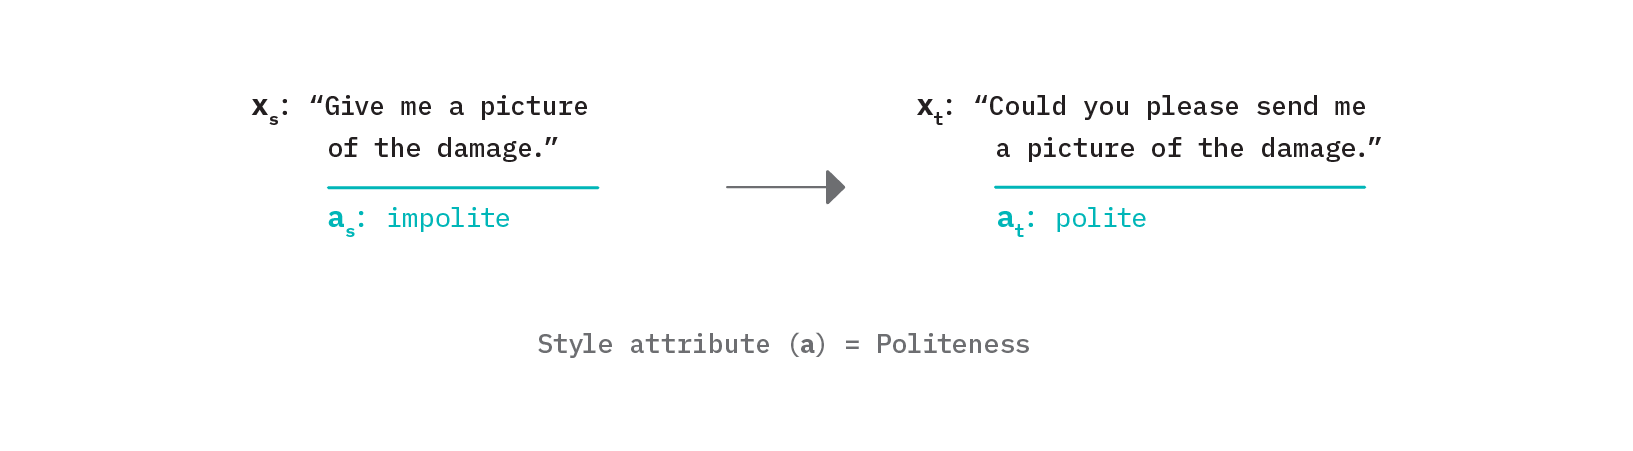 Figure 1: Example of text style transfer that brings impolite language into a polite tone.